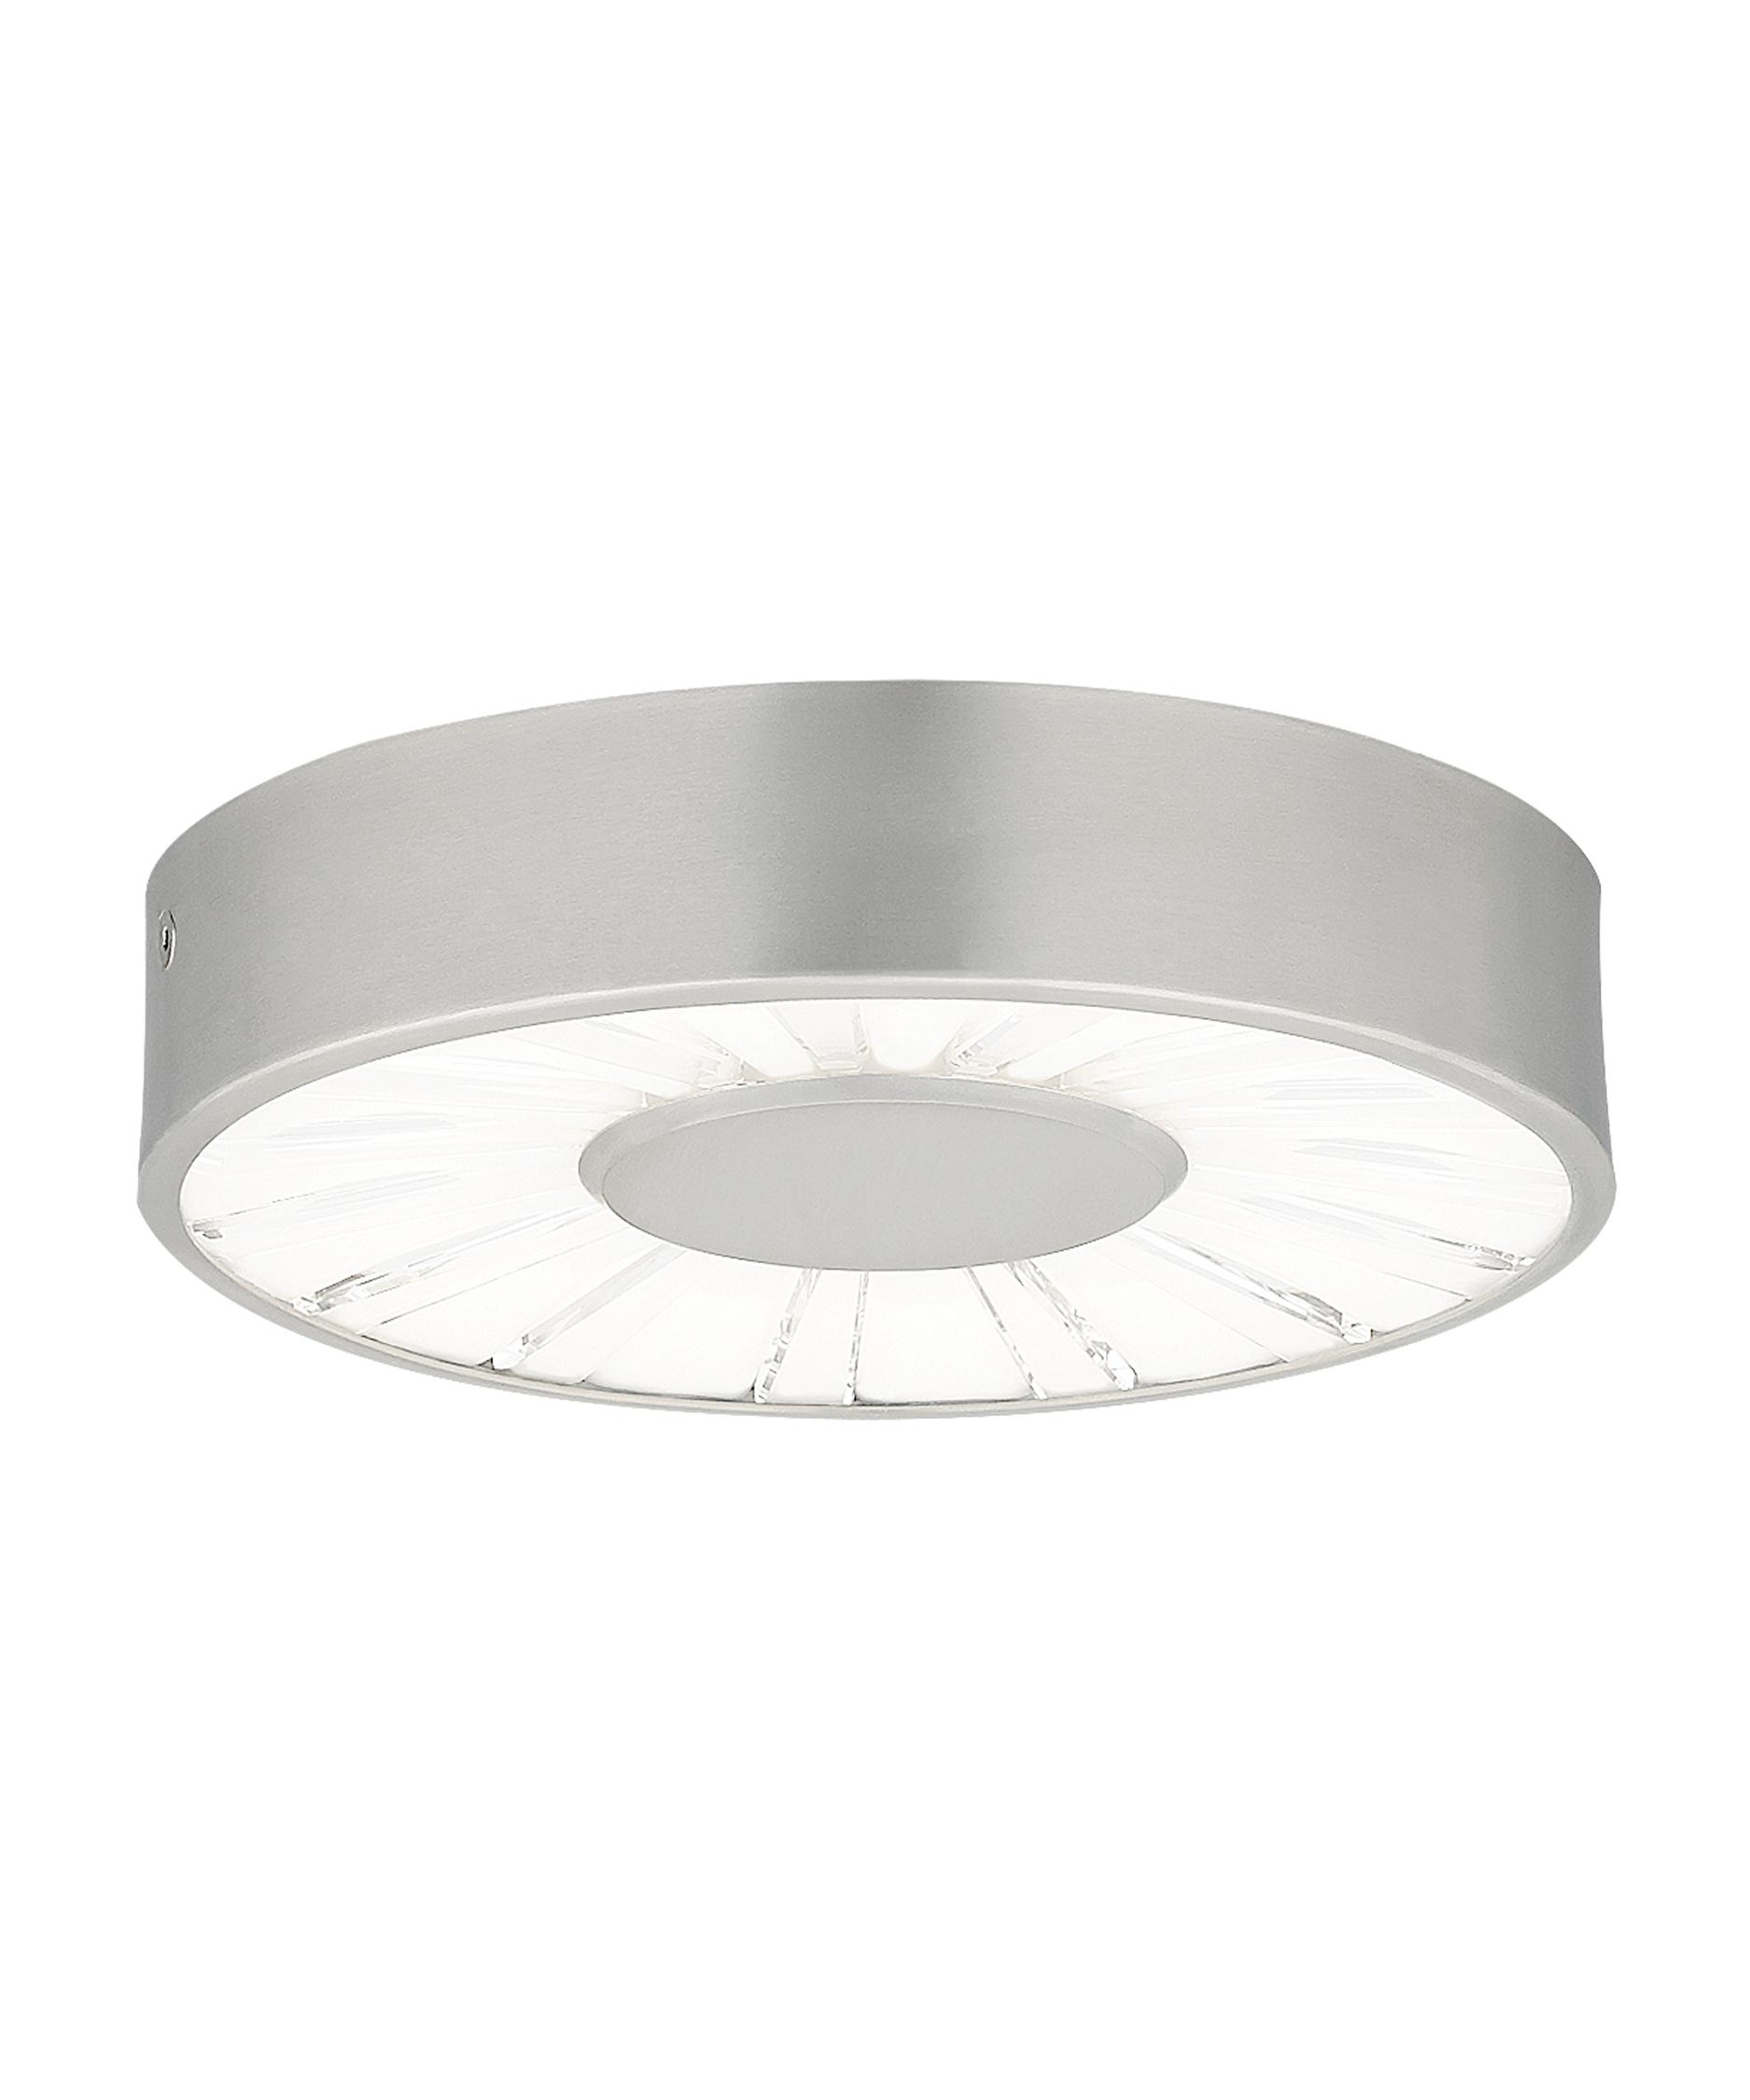 Small Flush Mount Ceiling Fan With Light Beautiful Flush Mount within measurements 1875 X 2250